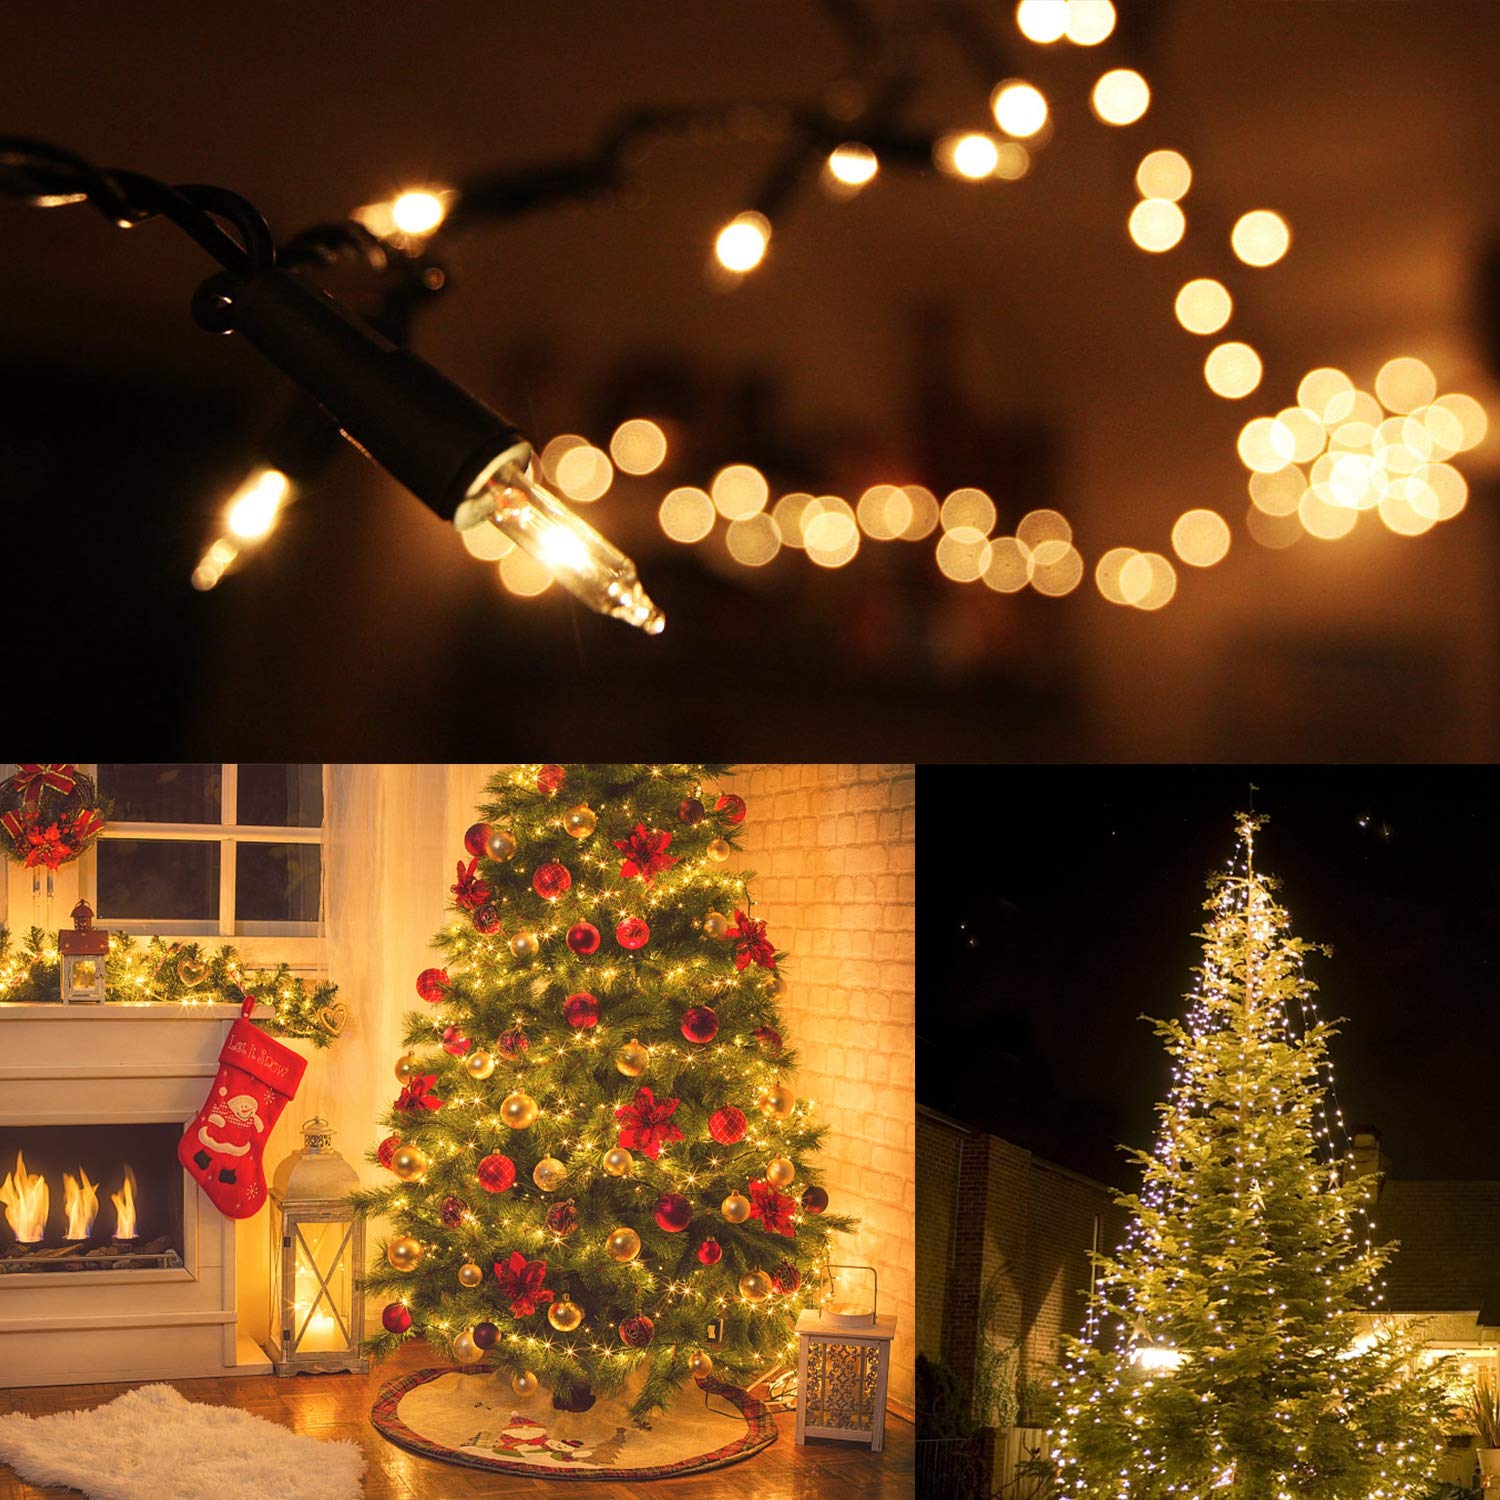 Christmas Lights, 150 Lights Incandescent Mini Clear String Light, 120V UL Certified Xmas Warm Tree Lights for Christmas Patio, Holiday, Party, Home, Indoor Outdoor Decoration